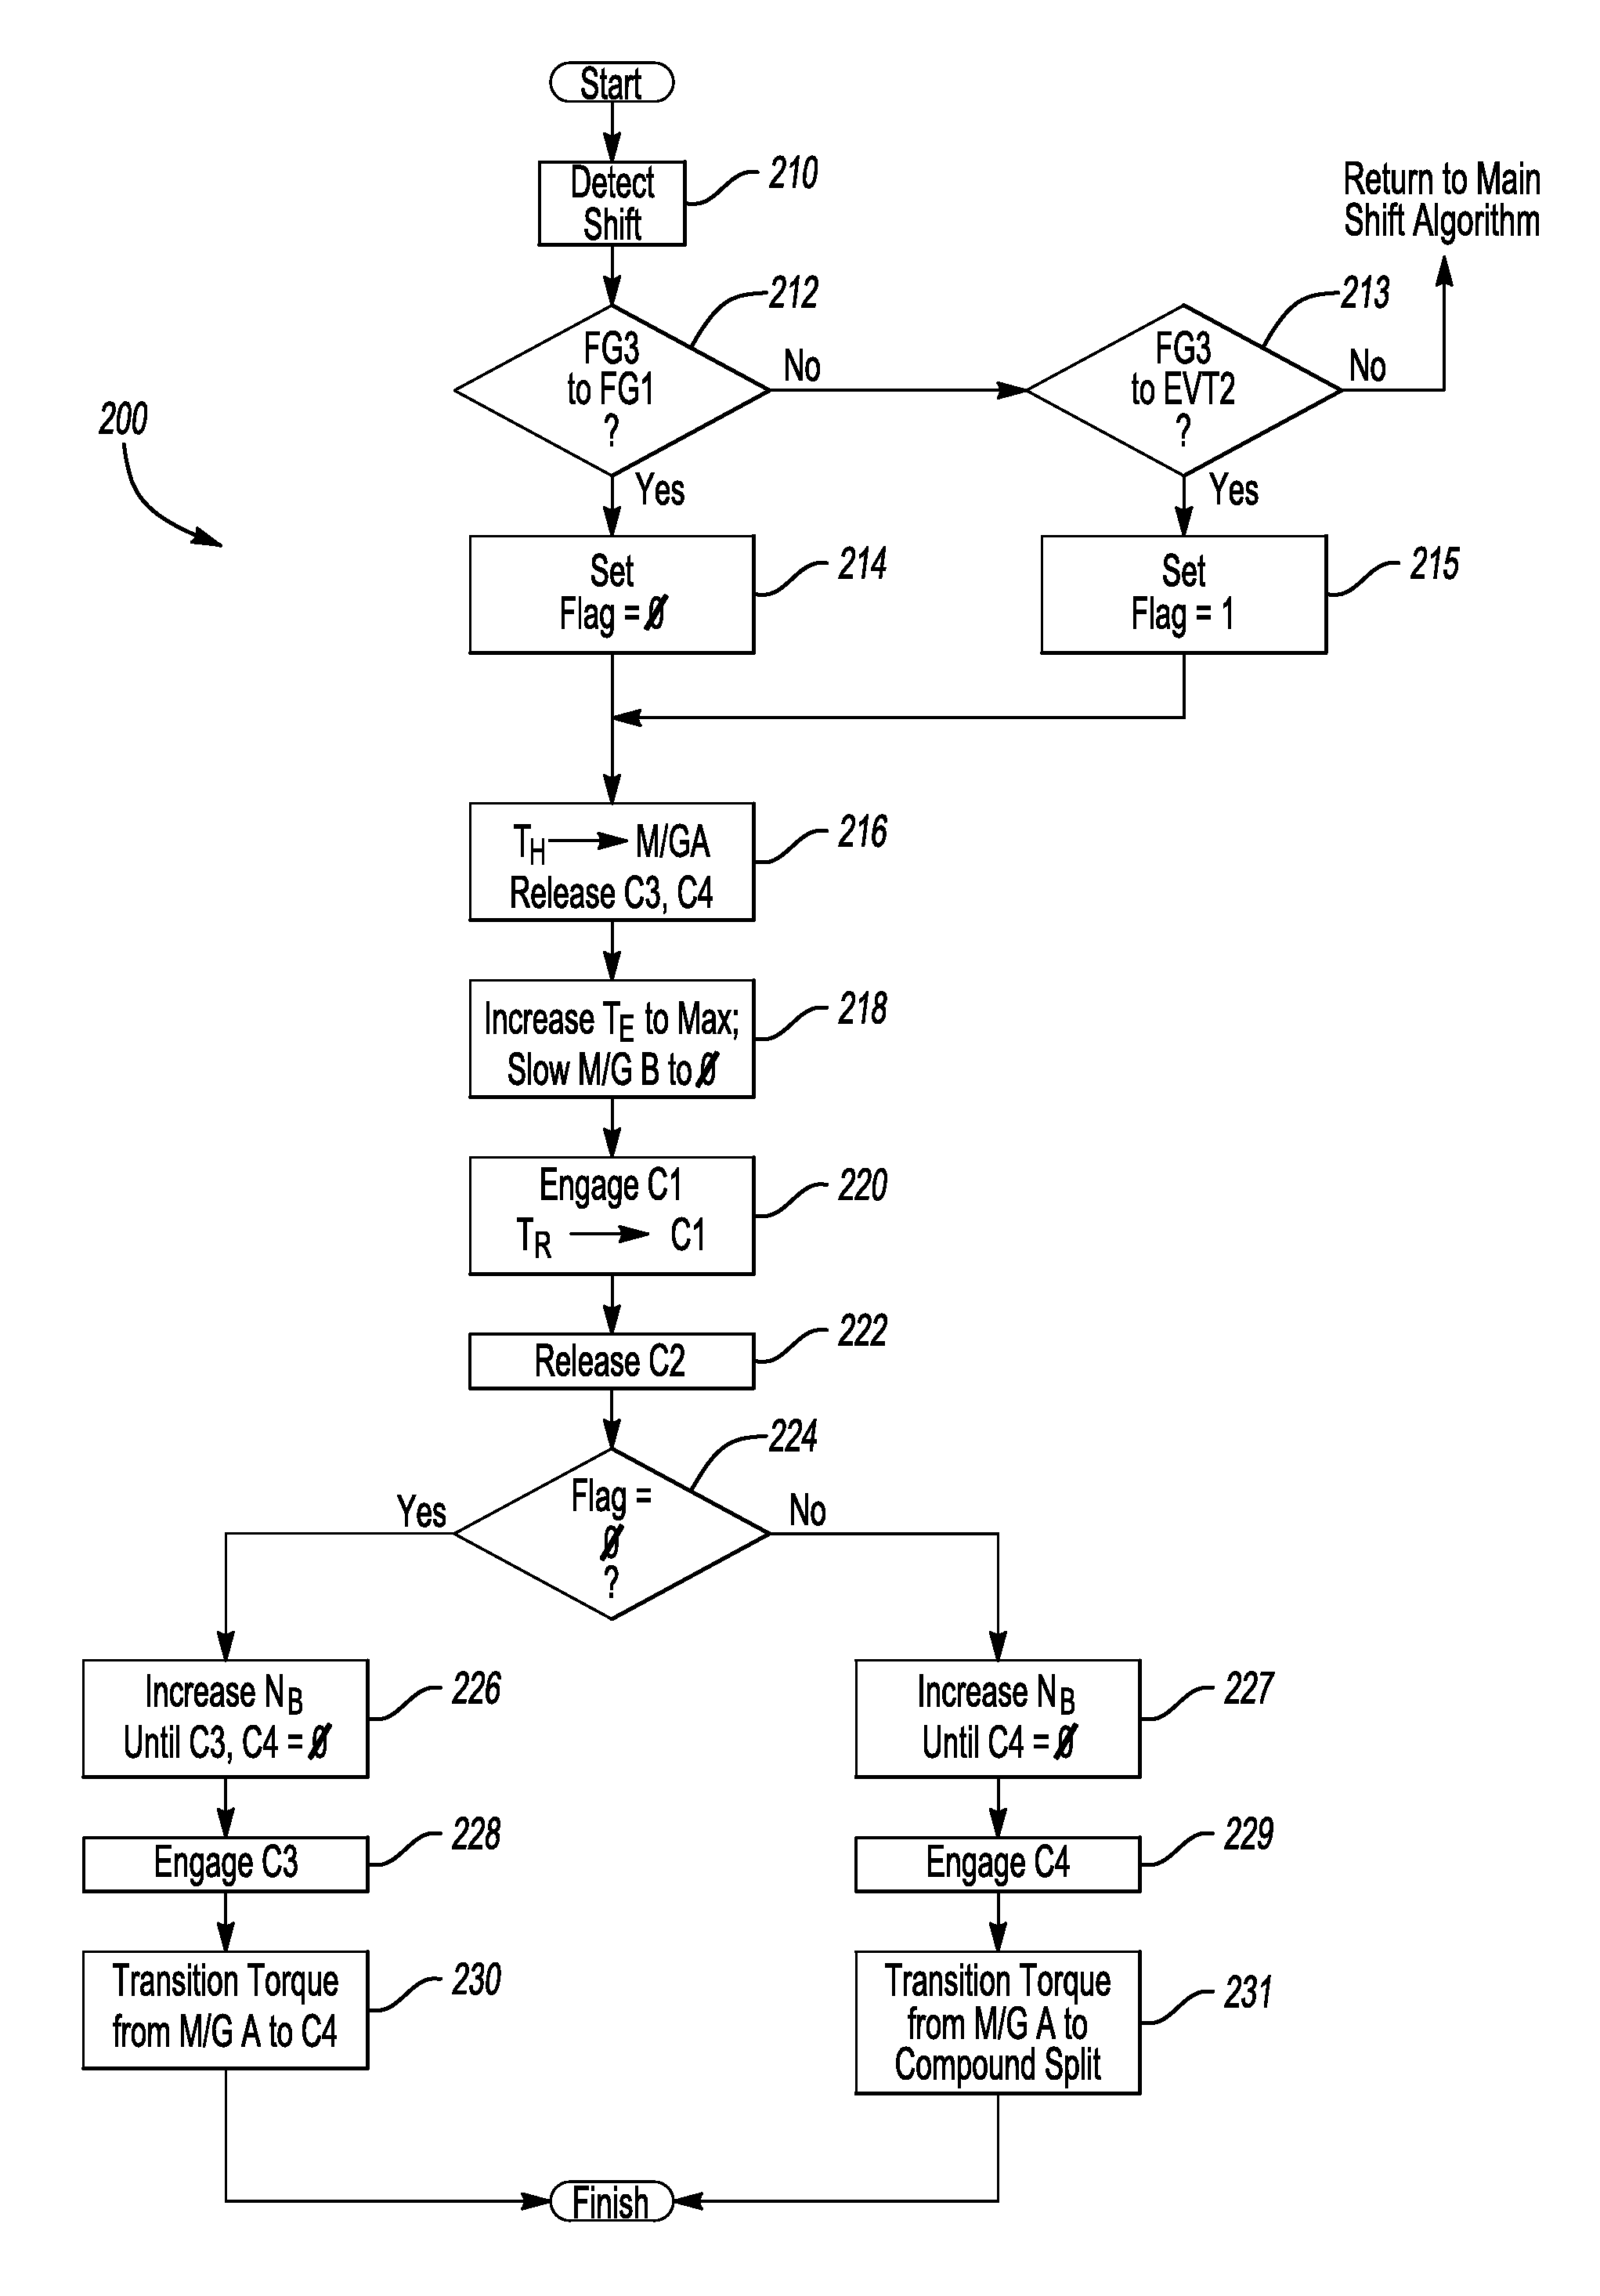 Method and Apparatus for Transitioning an Electrically Variable Transmission